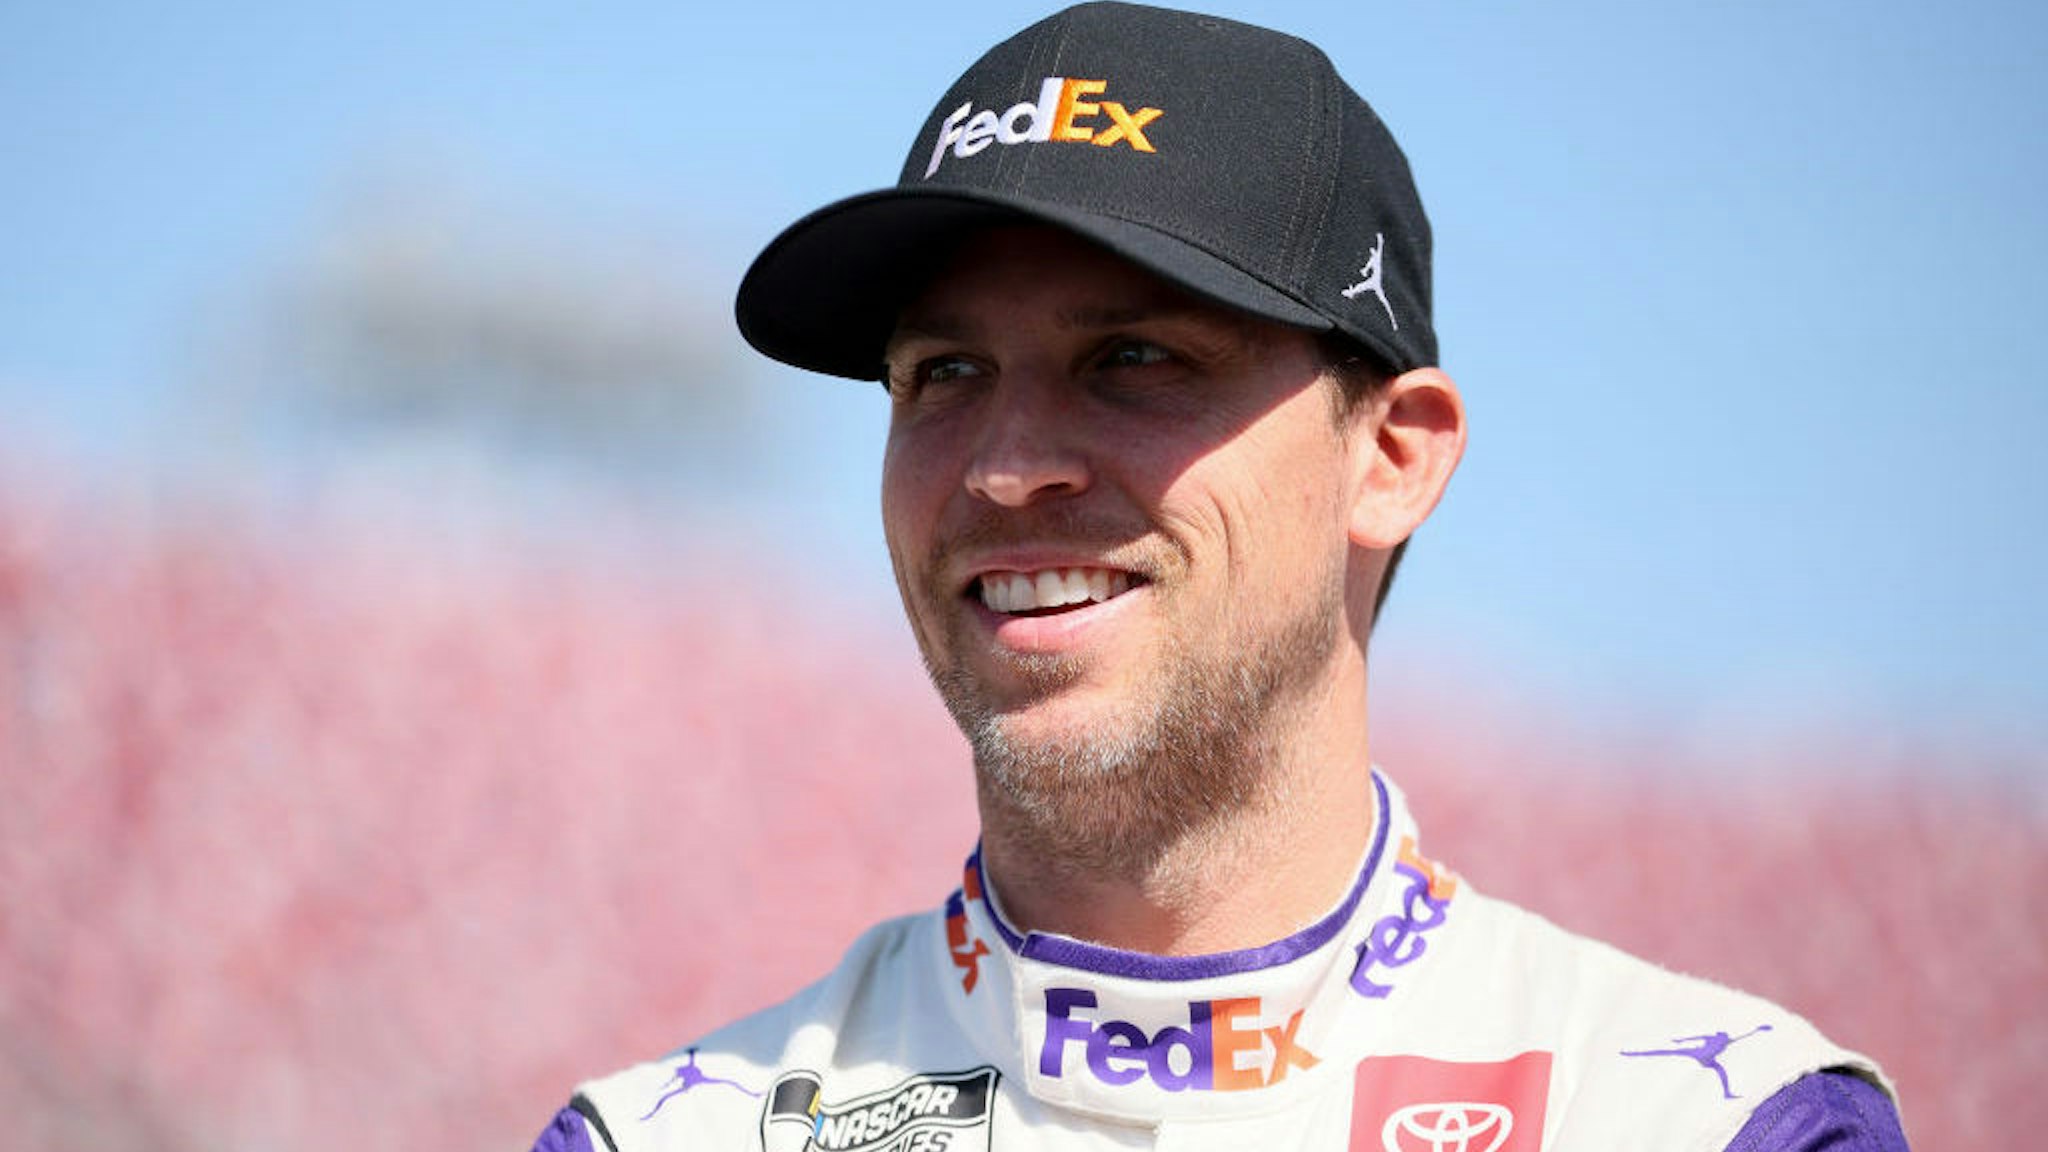 TALLADEGA, ALABAMA - APRIL 23: Denny Hamlin, driver of the #11 FedEx All in for Small Business Toyota, waits on the grid during qualifying for the NASCAR Cup Series GEICO 500 at Talladega Superspeedway on April 23, 2022 in Talladega, Alabama. (Photo by James Gilbert/Getty Images)